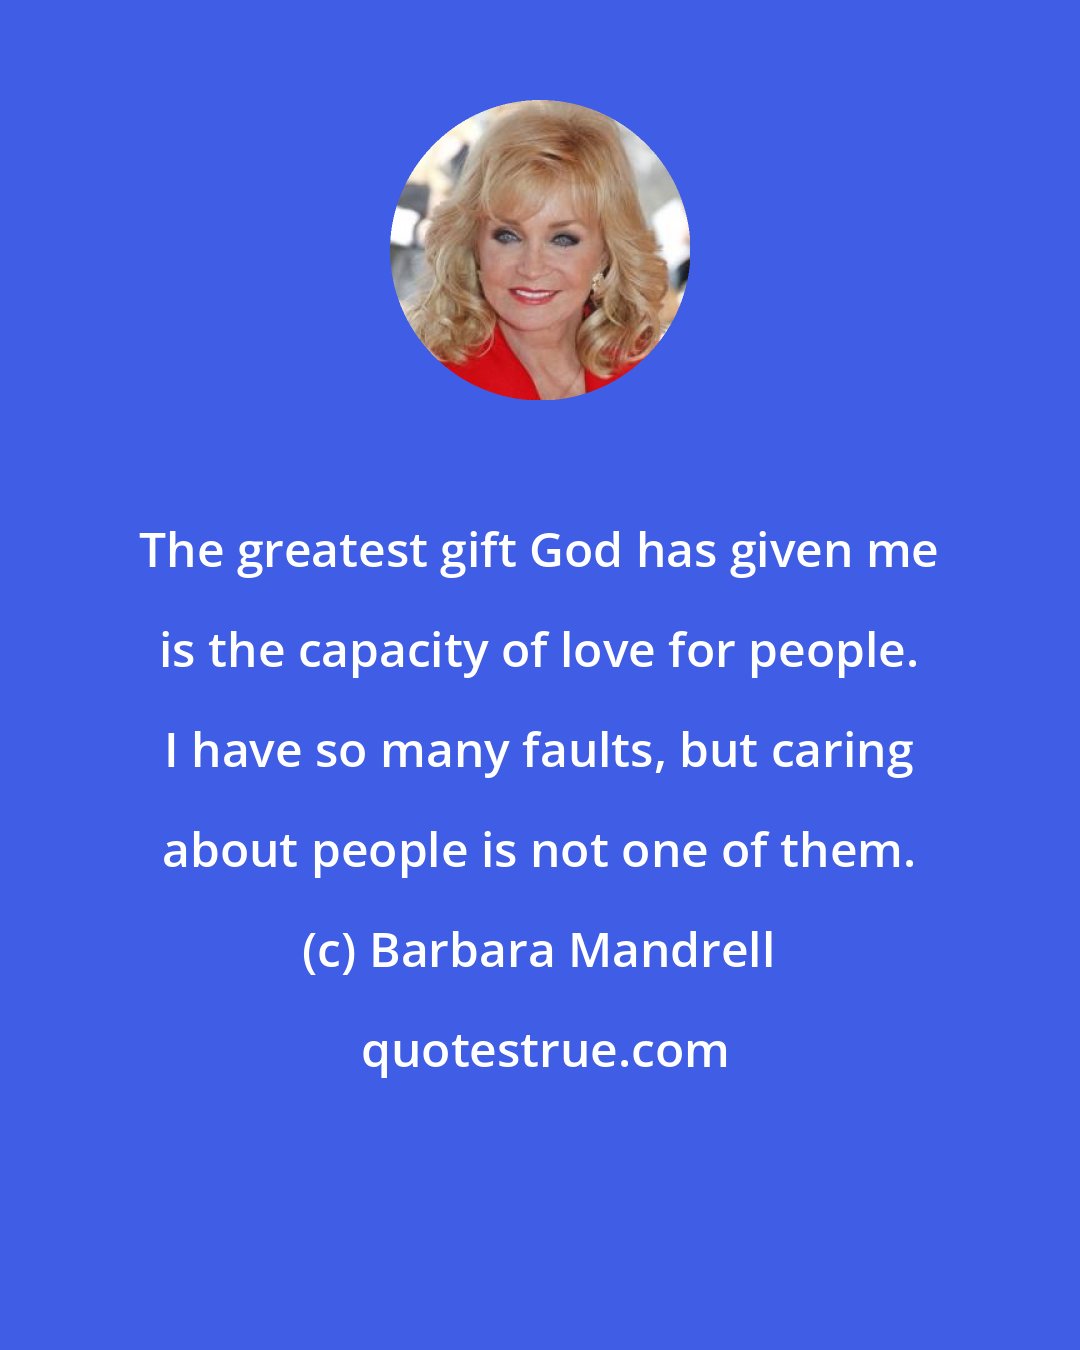 Barbara Mandrell: The greatest gift God has given me is the capacity of love for people. I have so many faults, but caring about people is not one of them.